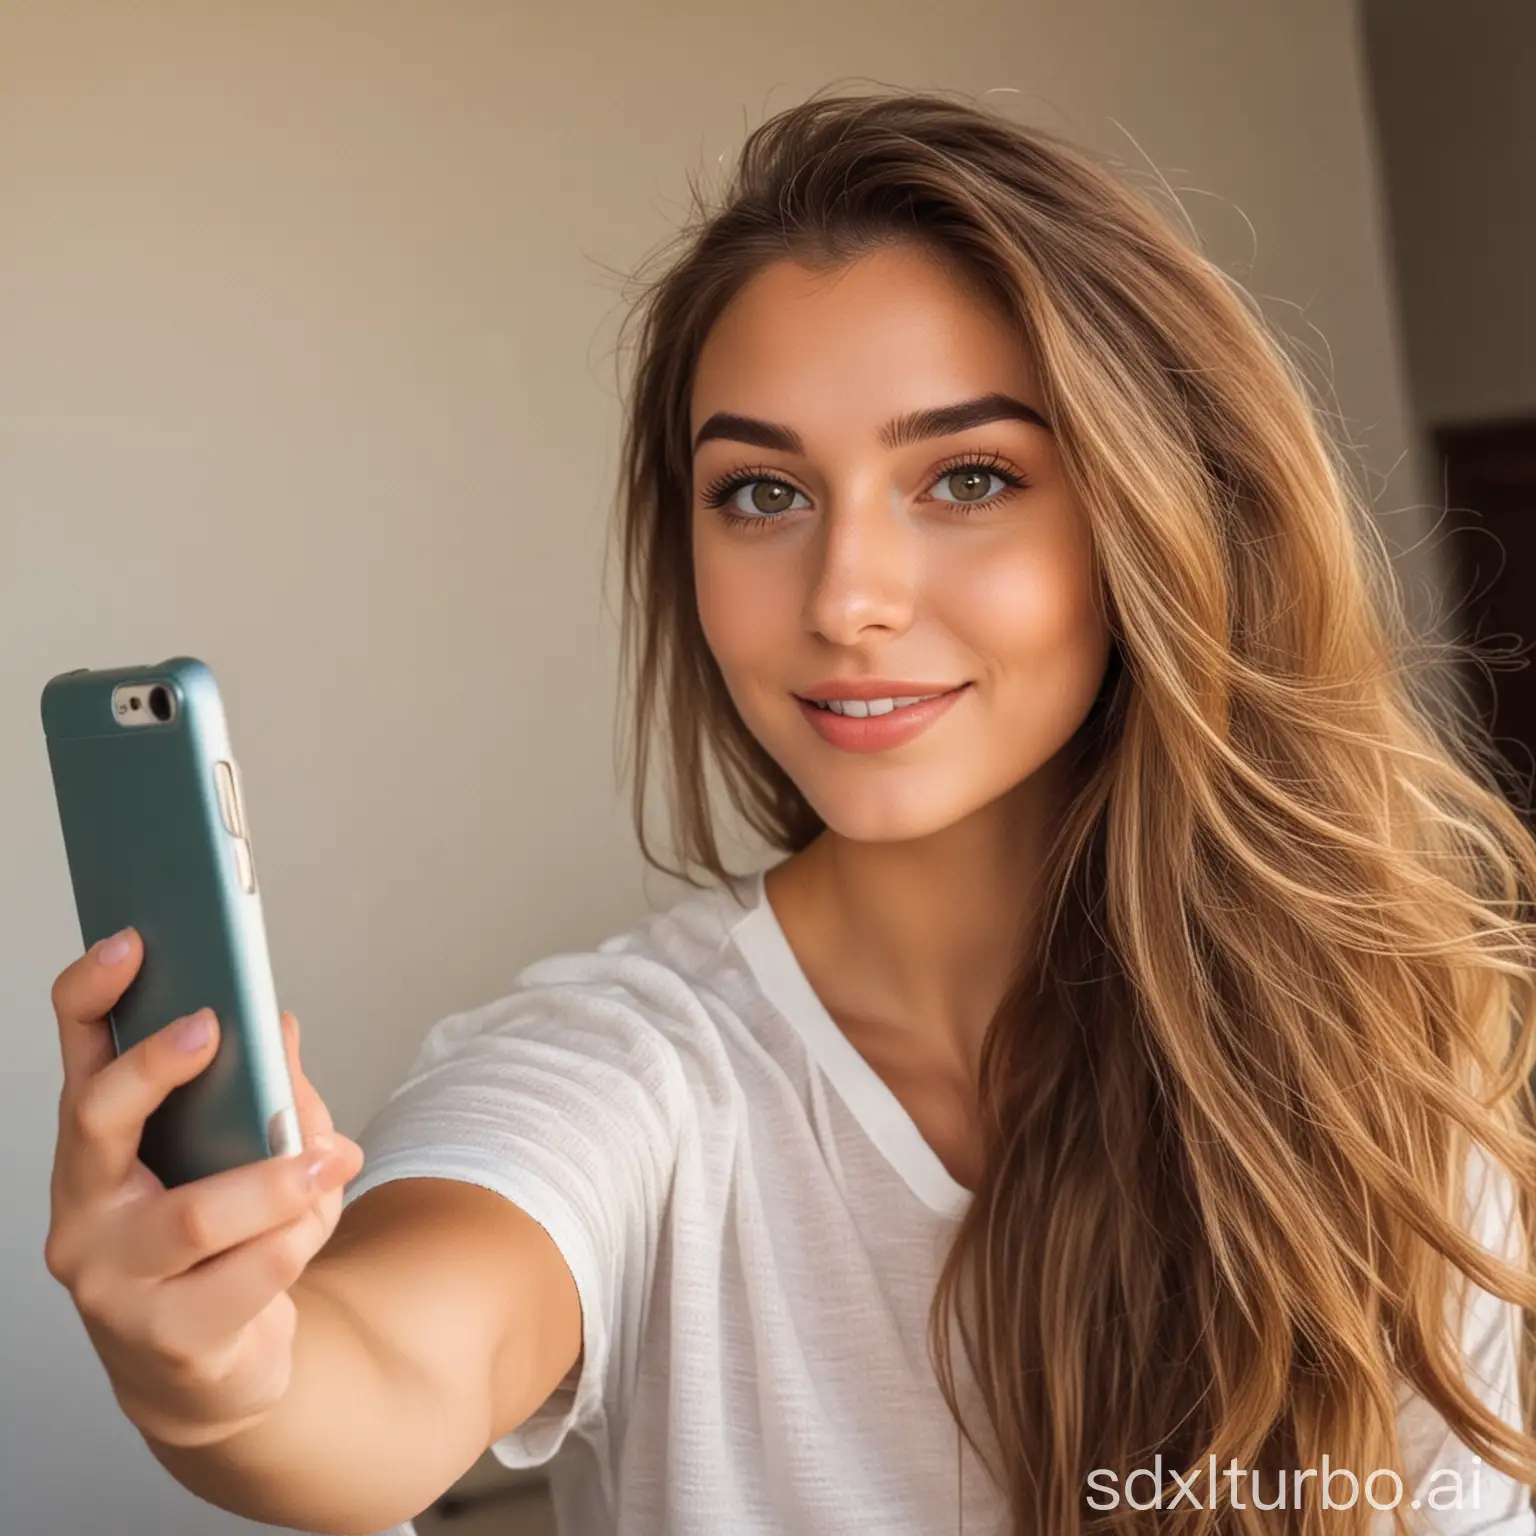 a beautiful girl taking a selfie with her phone